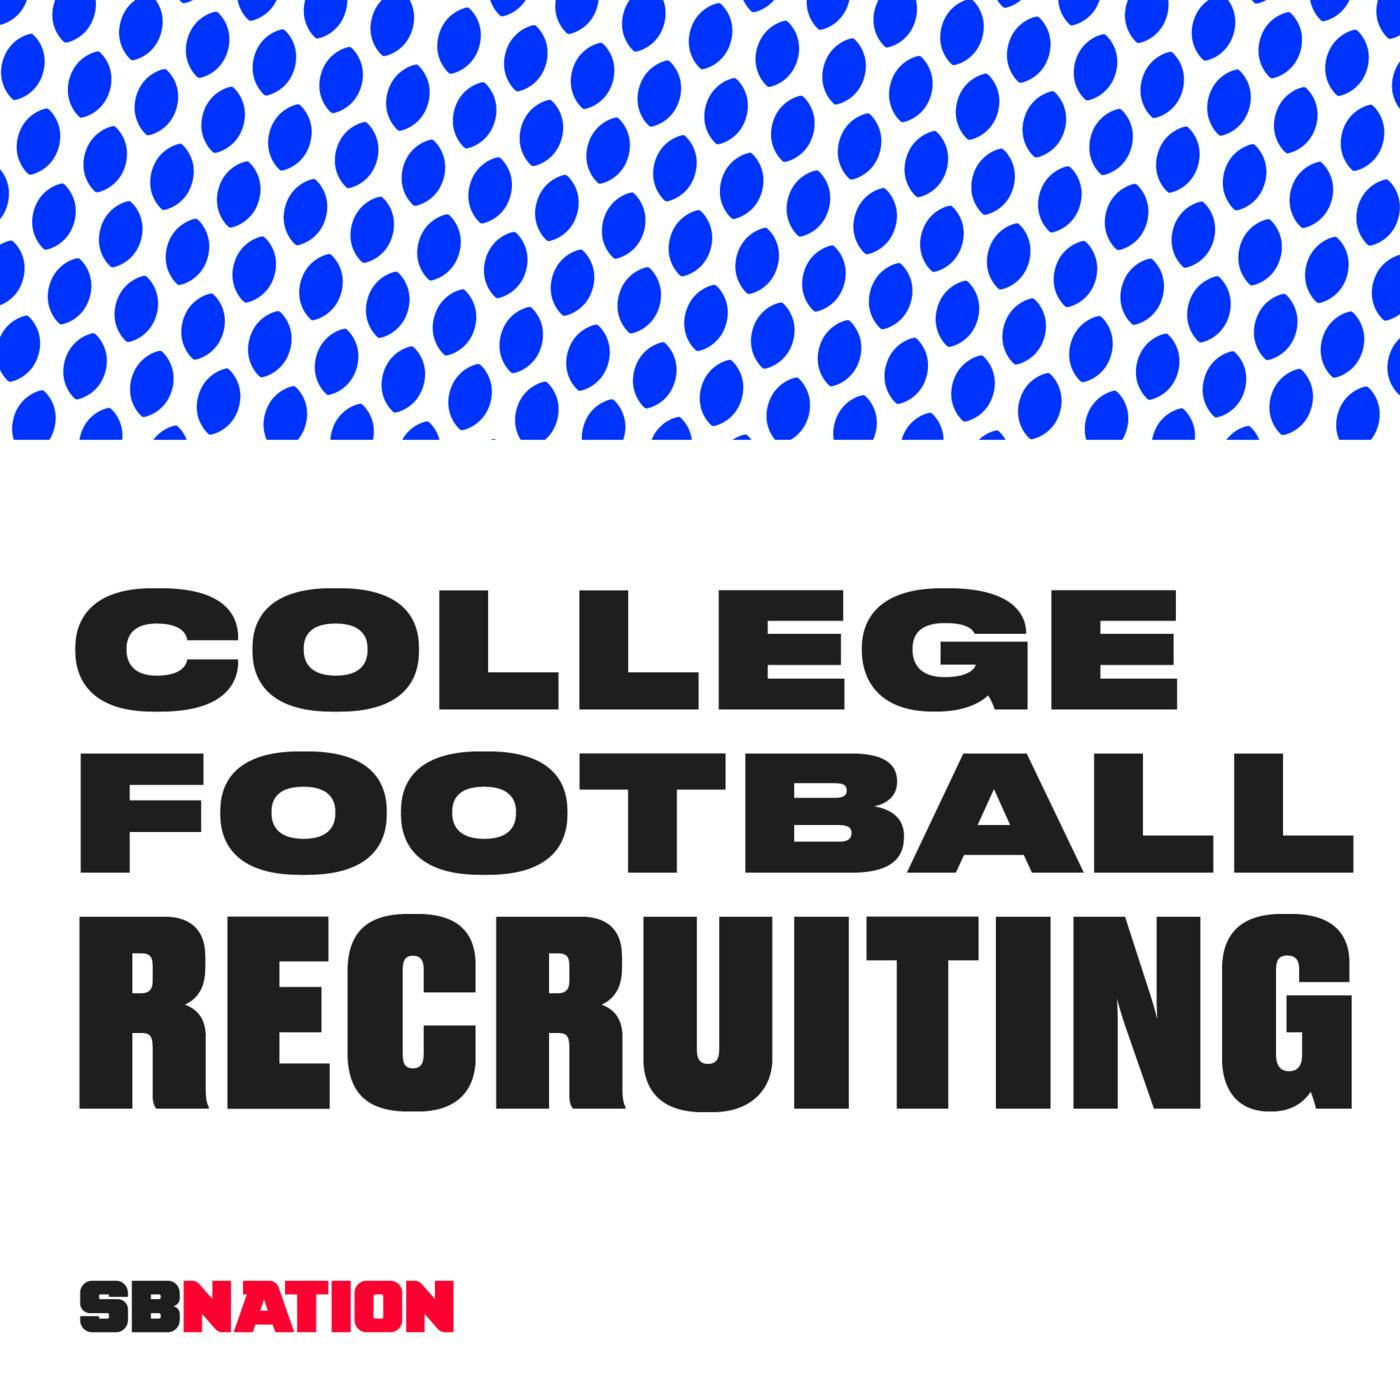 This week in college football recruiting: Ohio State to No. 1